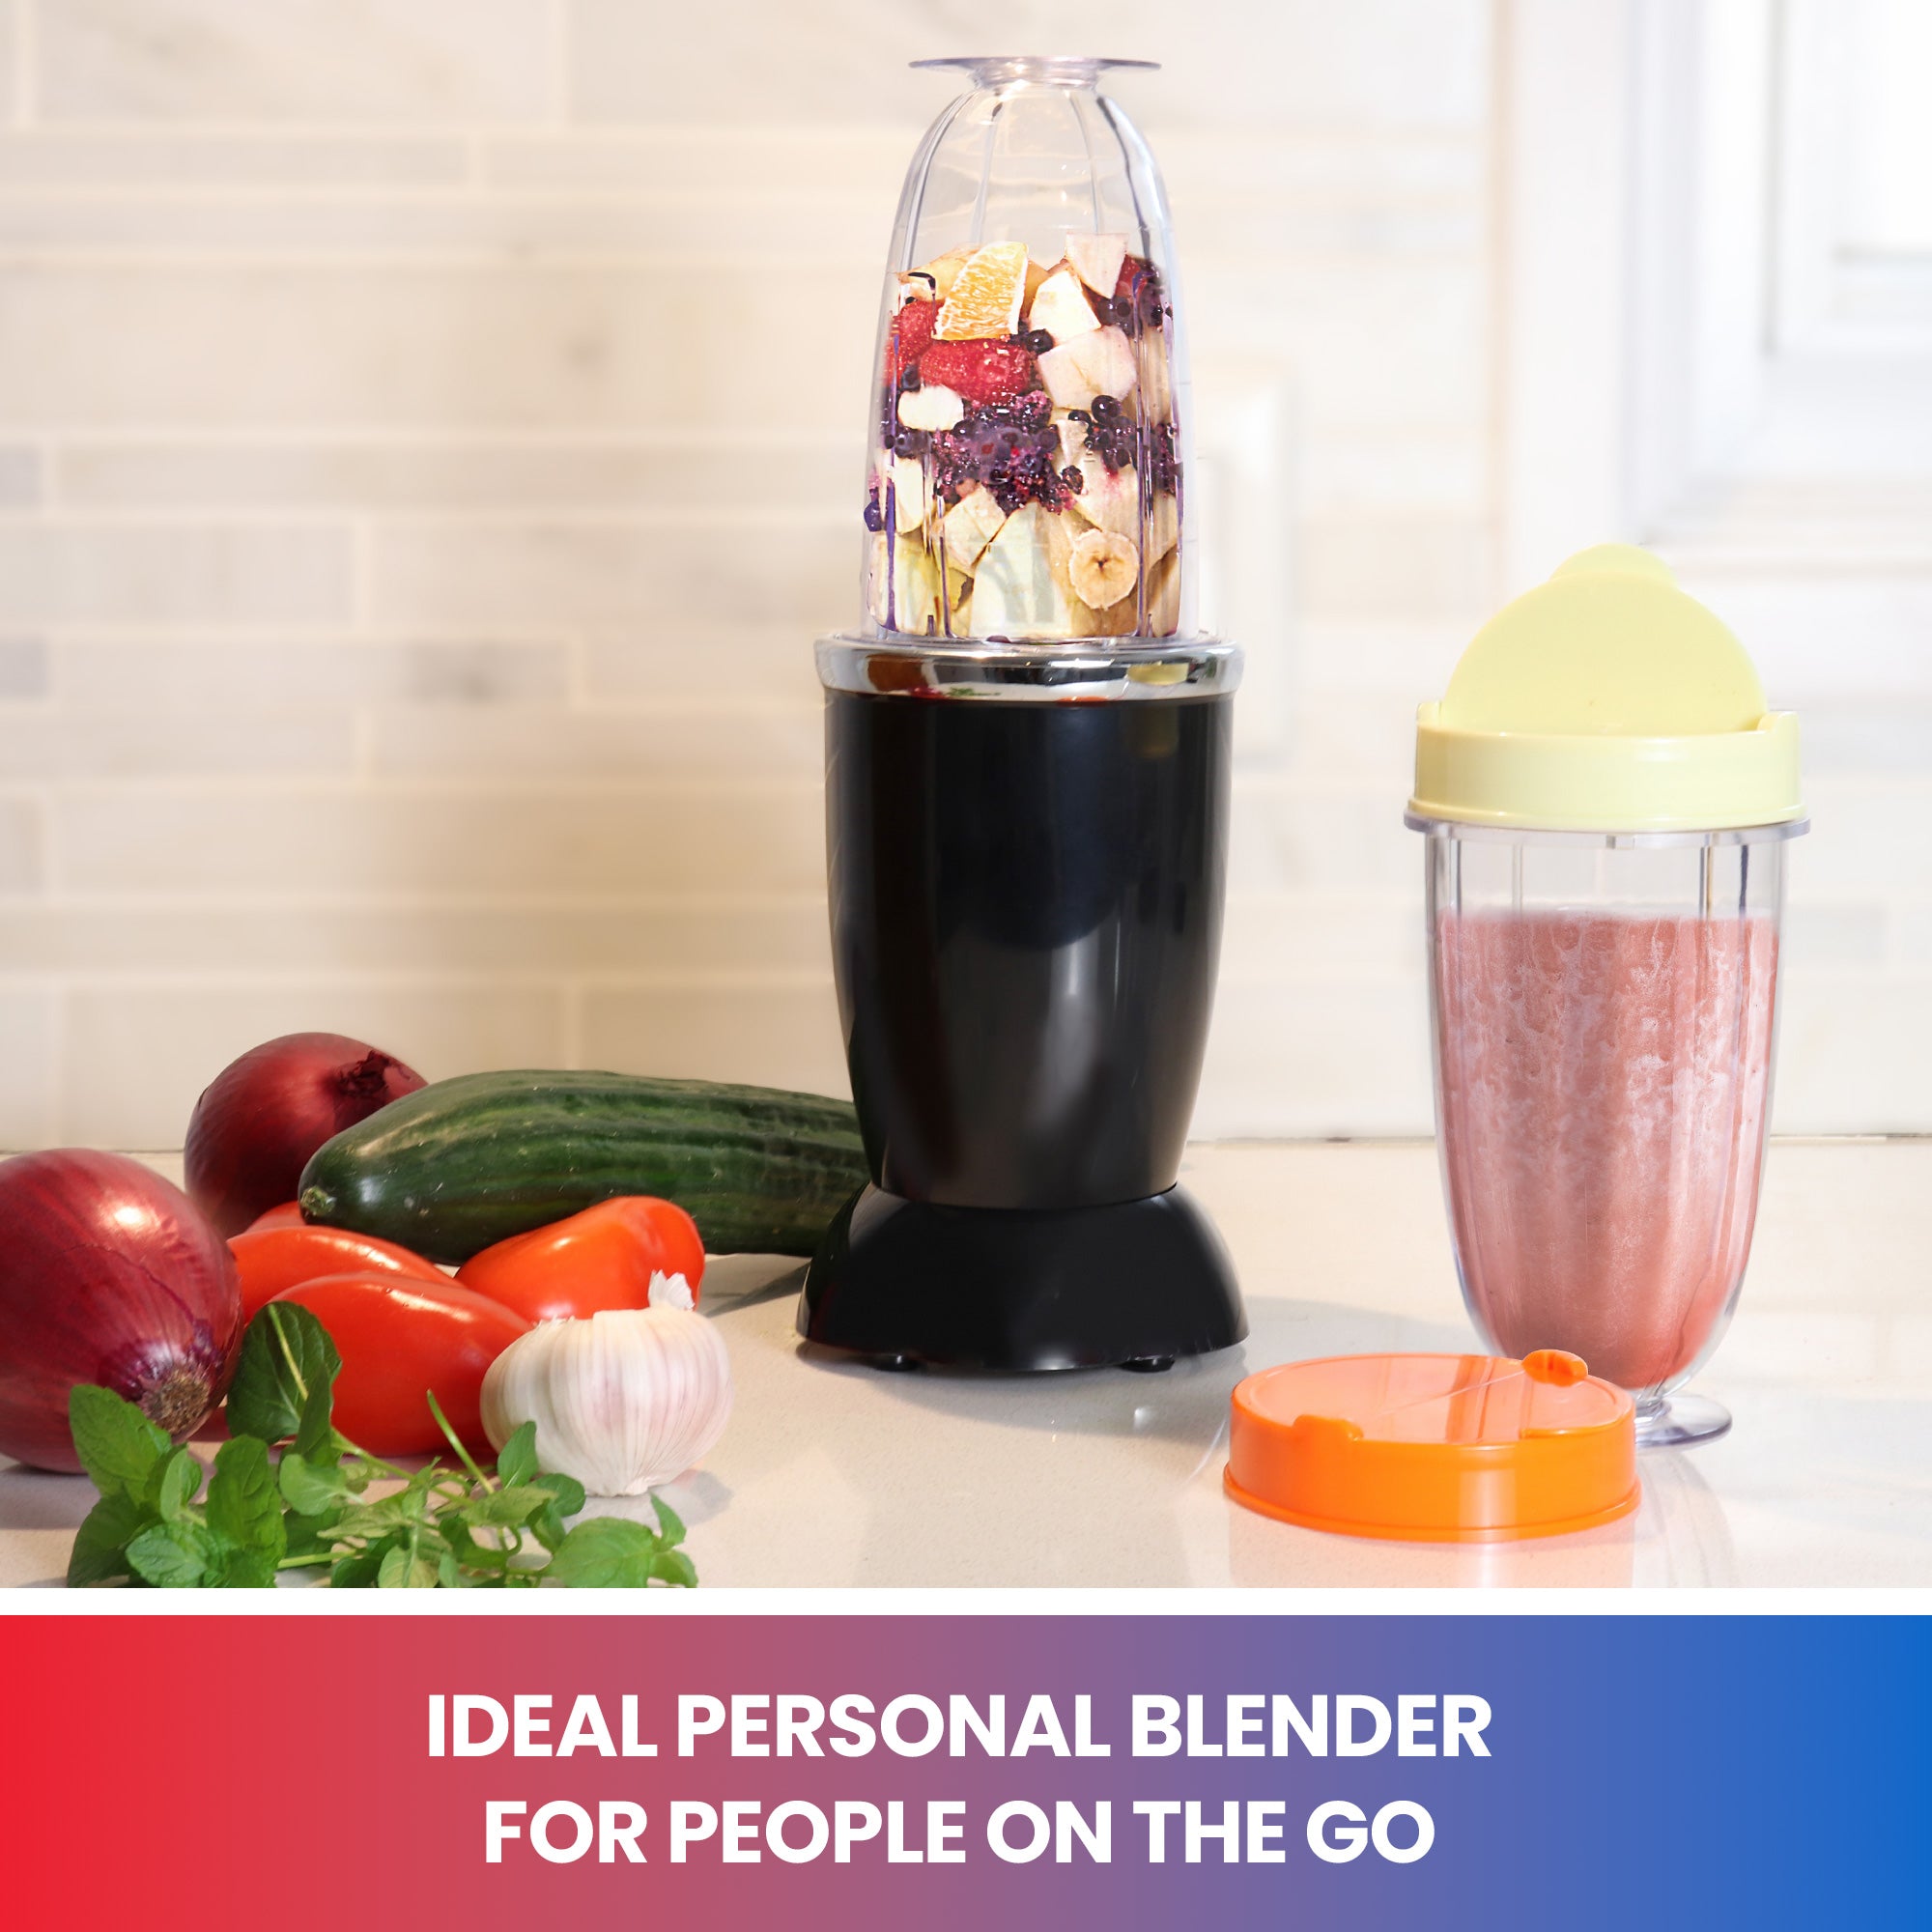 Lifestyle image of blender with travel cup filled with fruit on a white countertop with vegetables on the left and a travel cup of pink smoothie on the right. Text below reads "Ideal personal blender for people on the go"